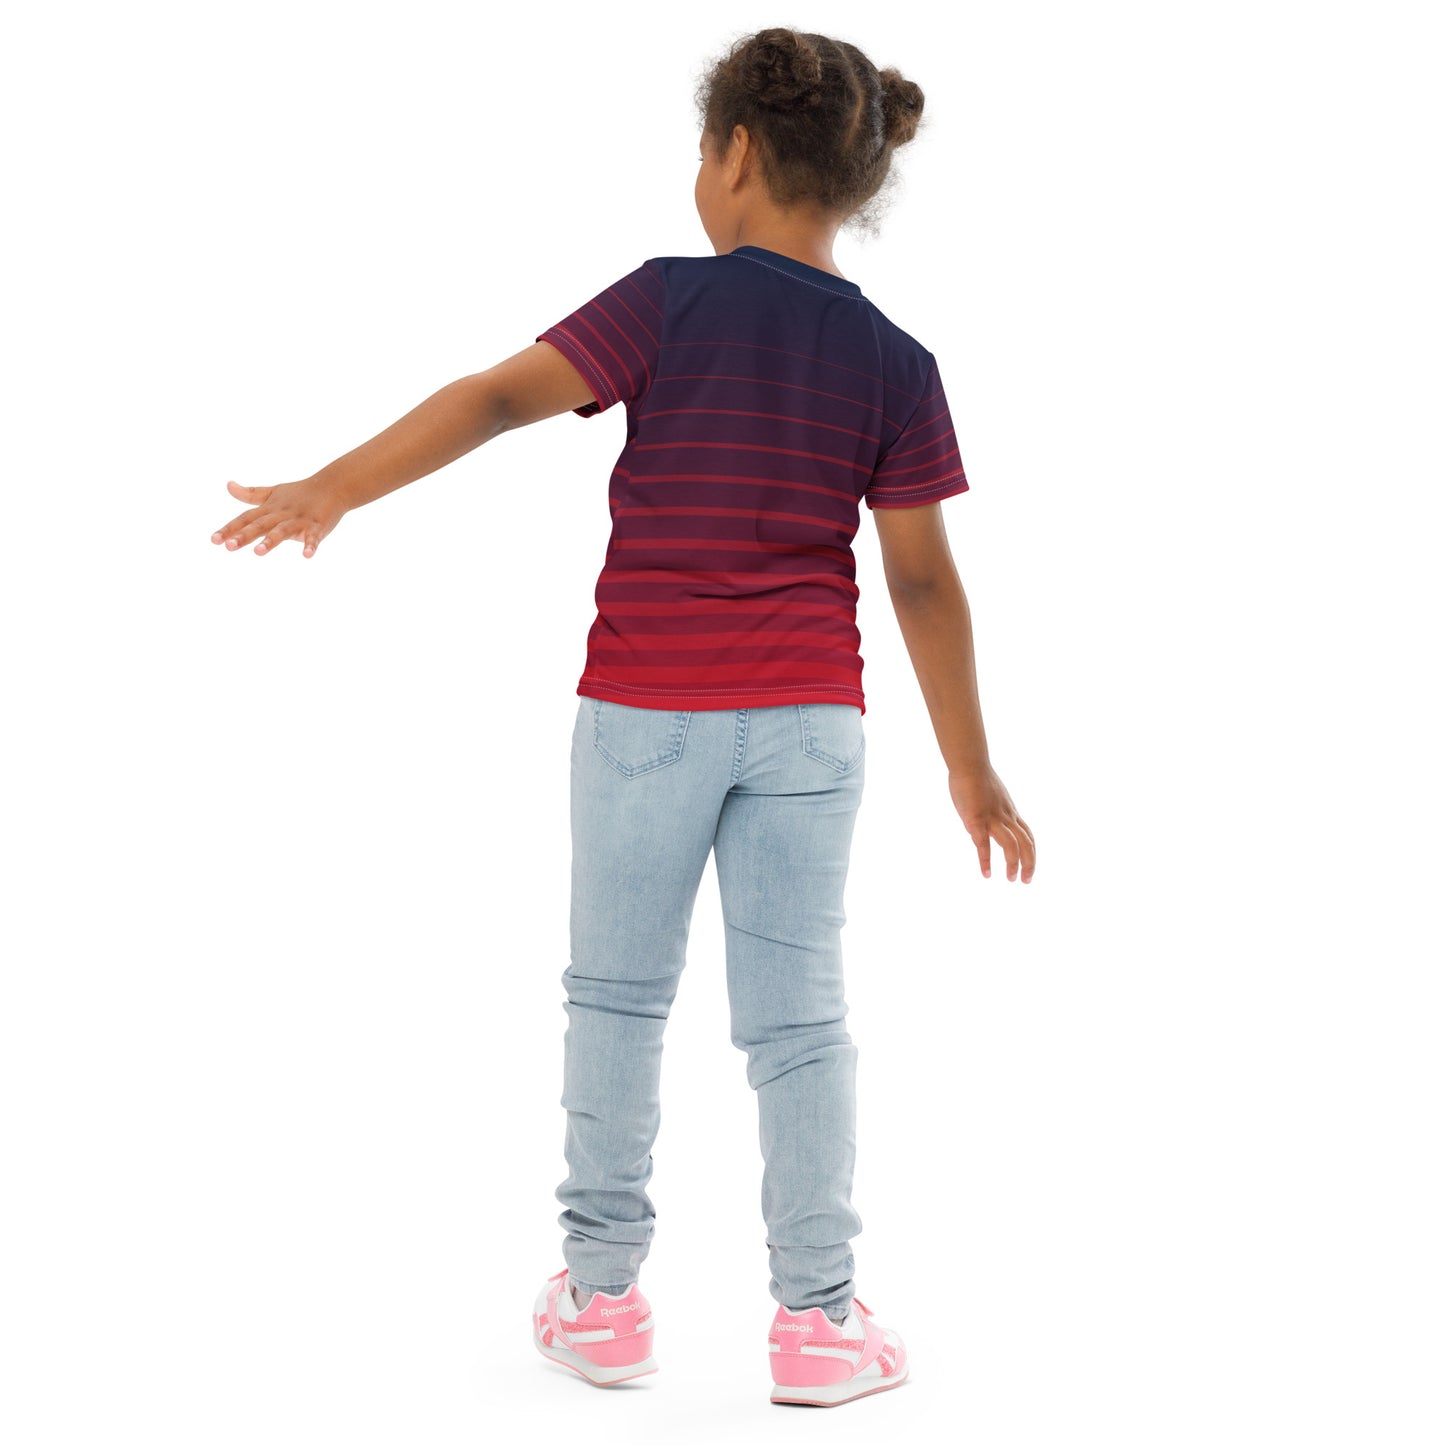 Kid with a all over print purple T-shirt with red stripes